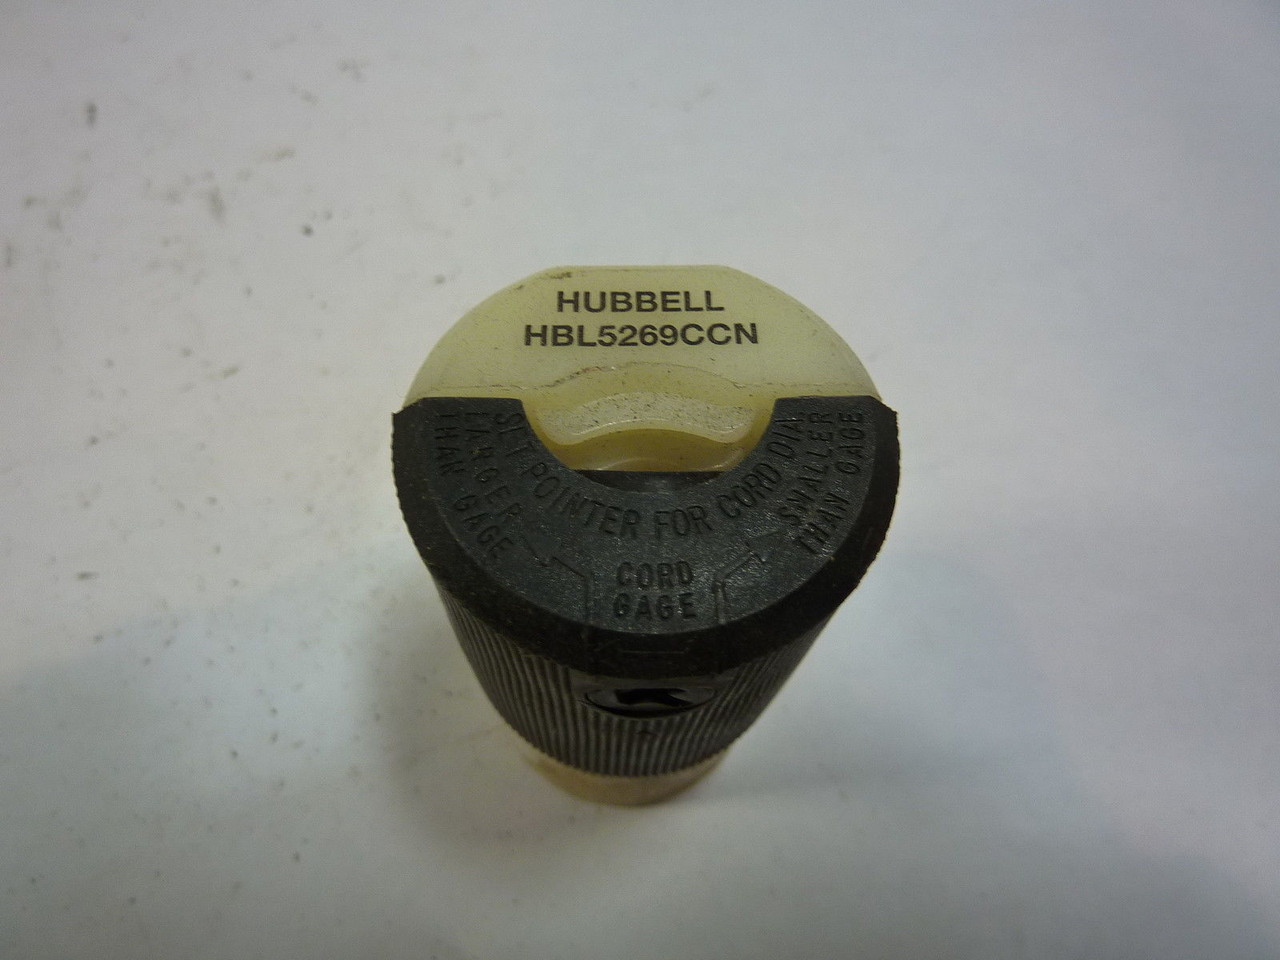 Hubbell HBL5269CCN Connector Body 15 Amp 125V USED